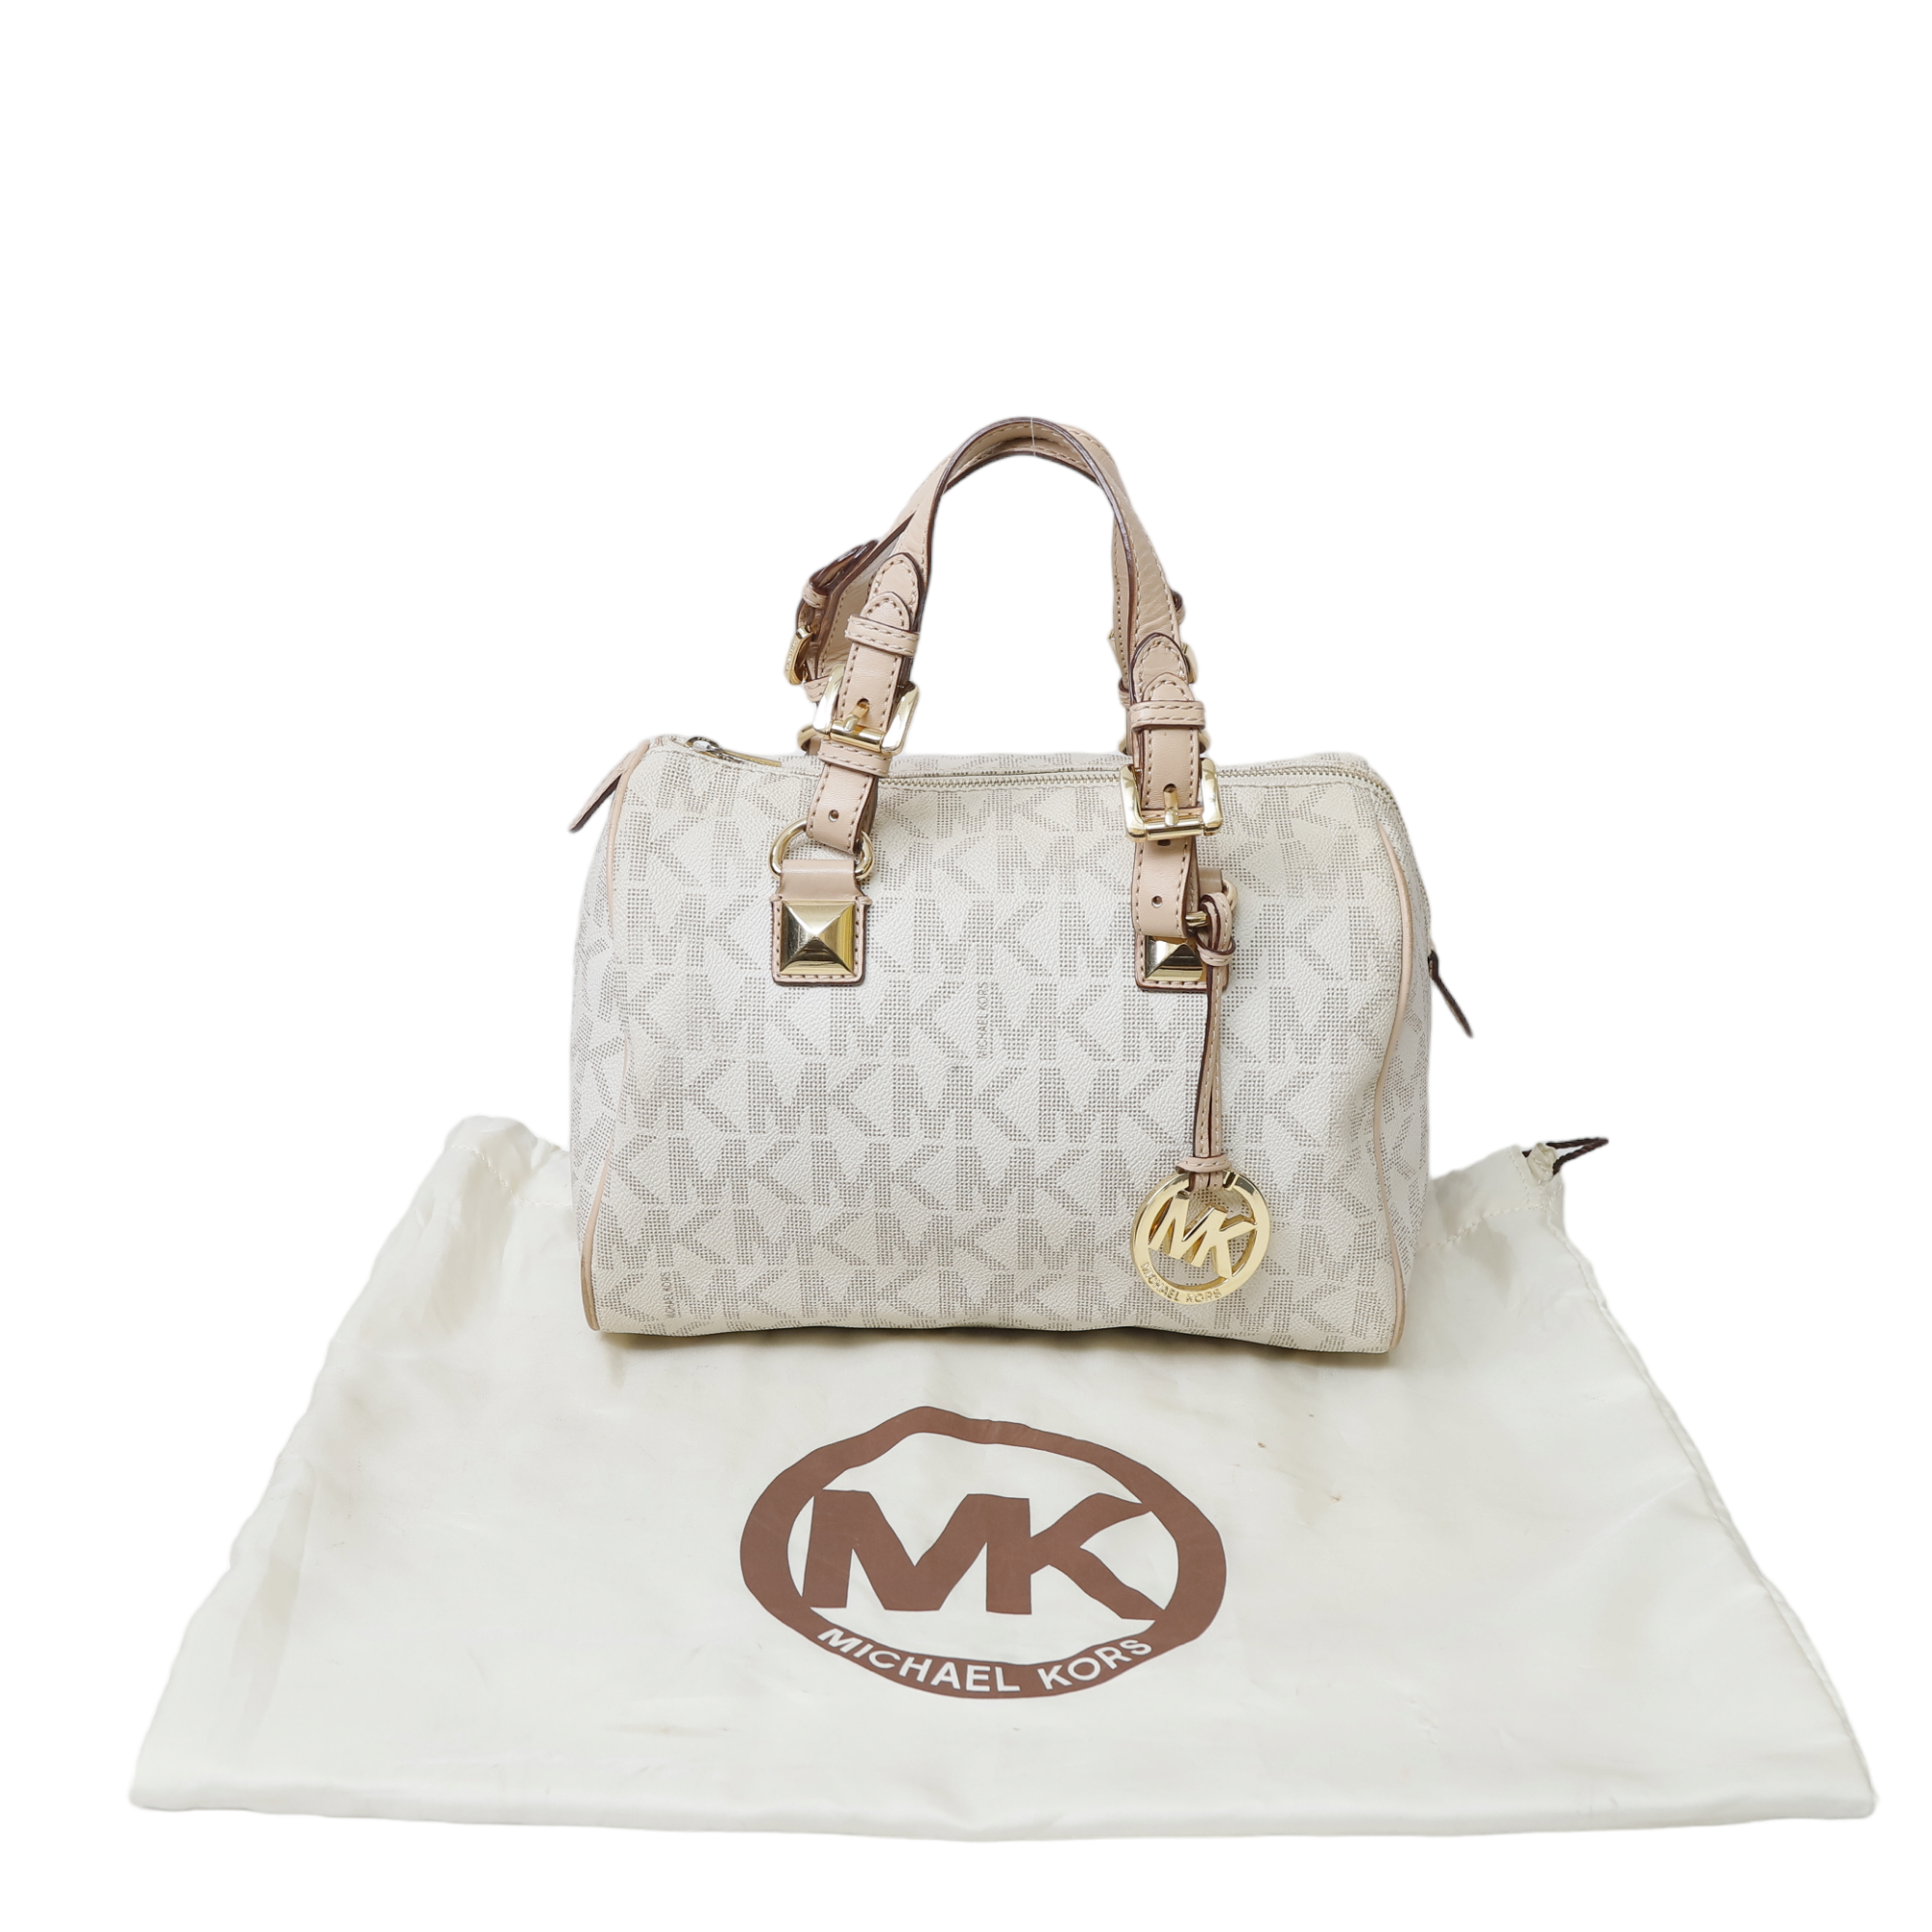 Buy the Michael Kors White Pebbled Satchel Bag with Matching Studded Wallet  | GoodwillFinds